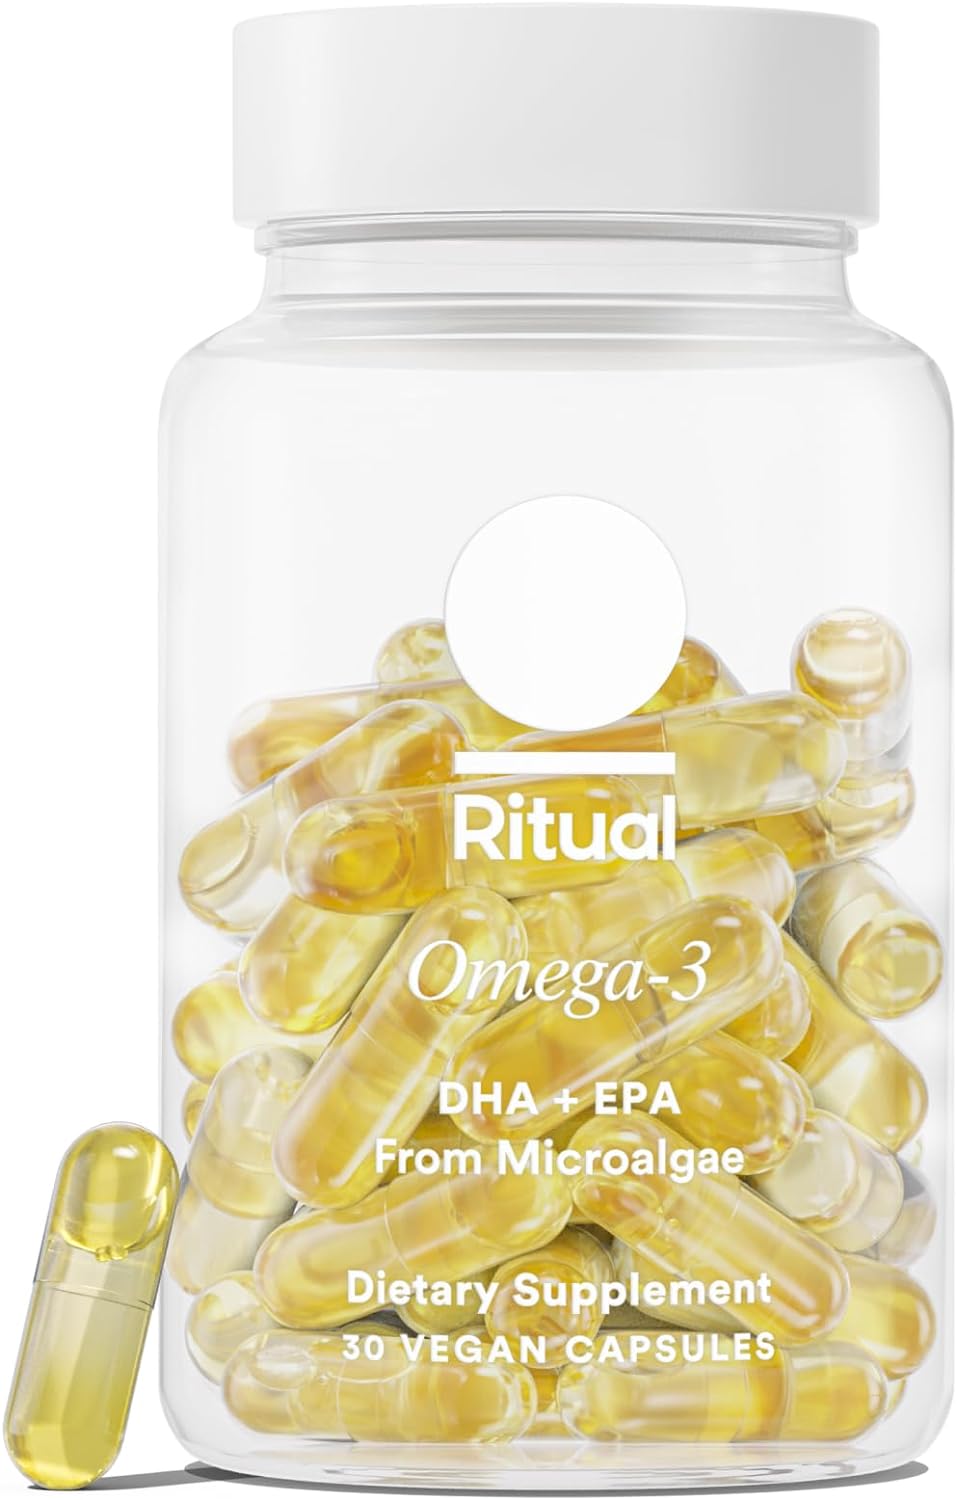 Ritual Omega 3 DHA & EPA - Vegan - Science-Backed Dose of DHA & EPA in 2:1 Ratio, Minimal Burp-Back, Sustainably Sourced Microalgae, 30 Day Serving